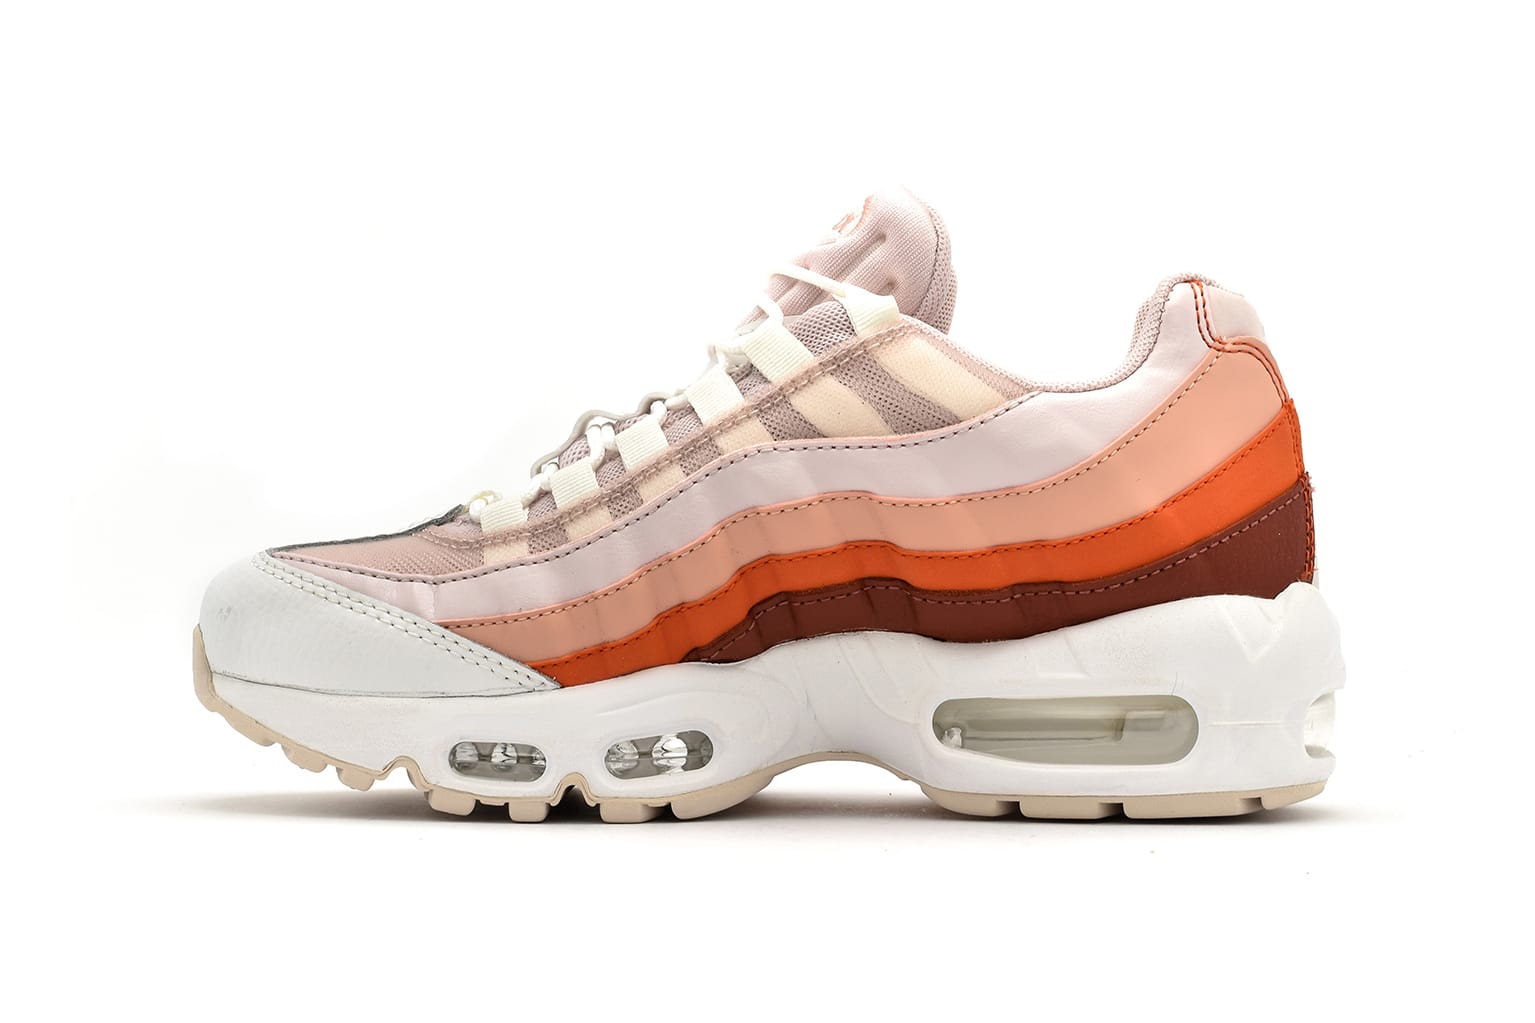 Nike Air Max 95 in Barely Rose Coral Stardust | HYPEBAE